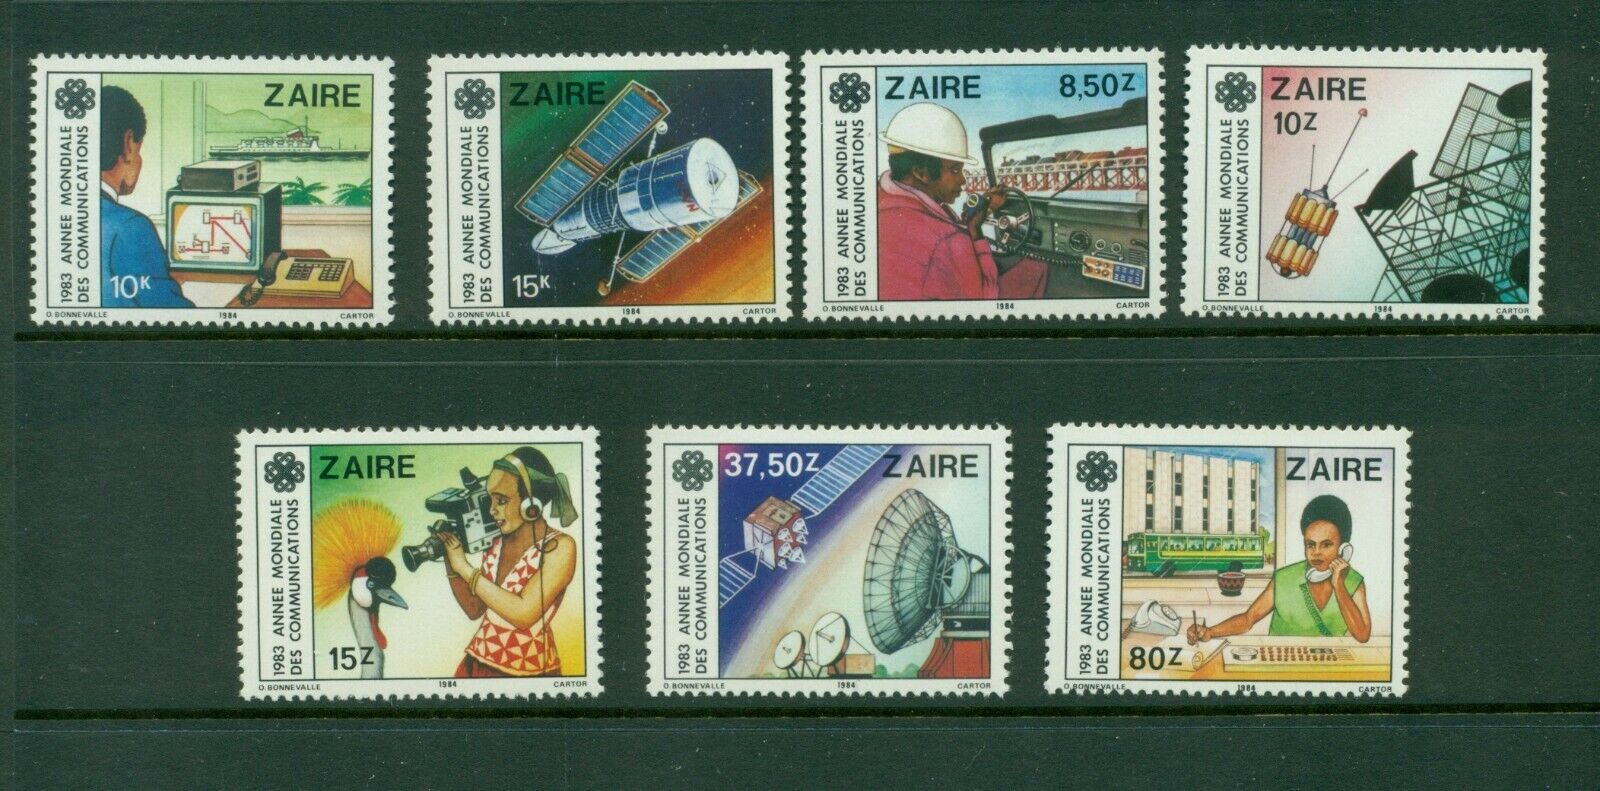 Zaire #1139-45 Quantity limited 1984 Communications Manufacturer direct delivery Year VFMNH CV $11.45 set